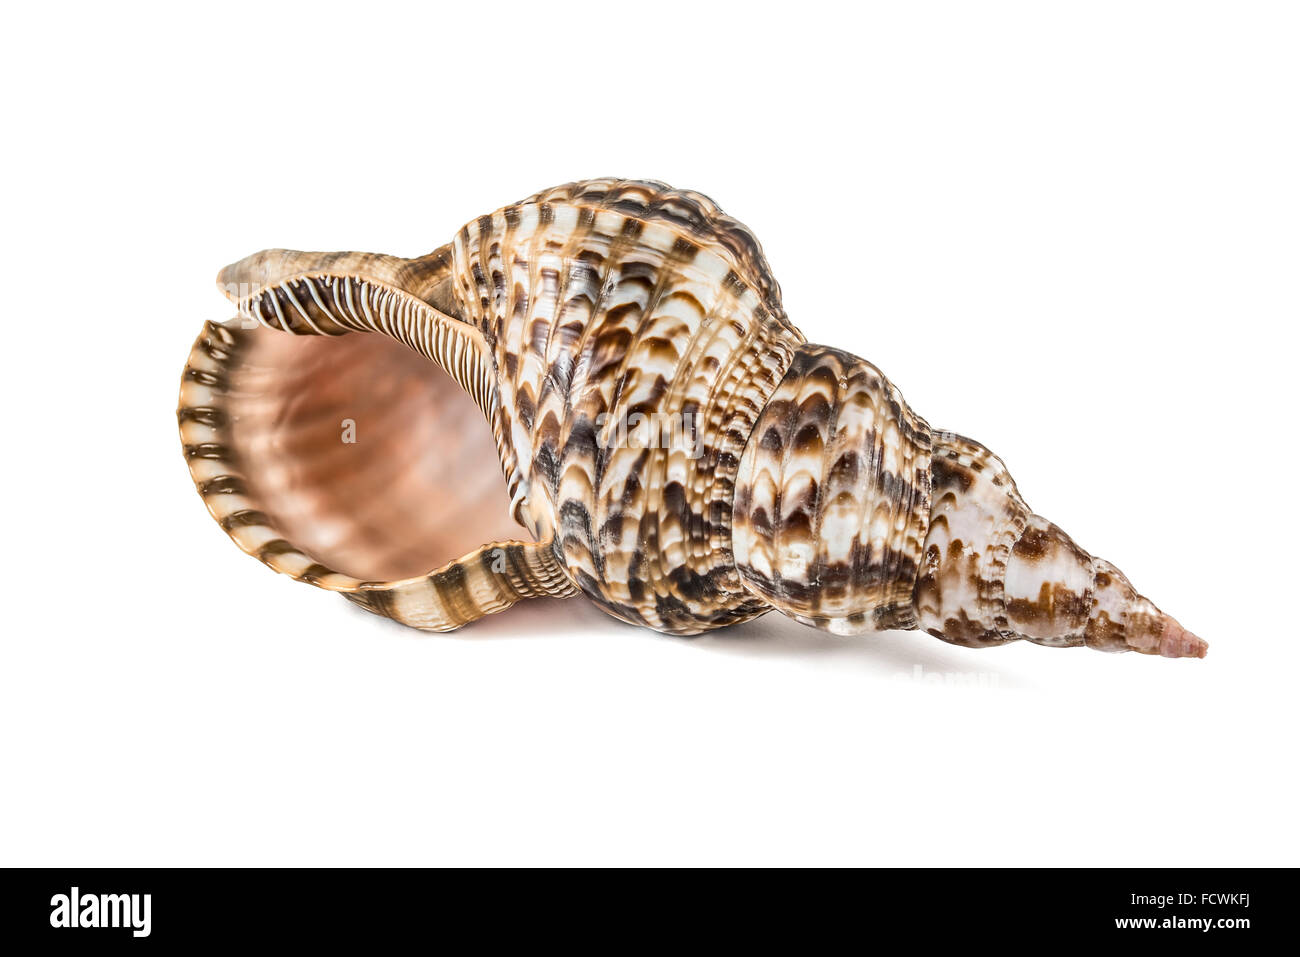 Shell, Conch Shell, Queen Conch. Isolated on white. Stock Photo